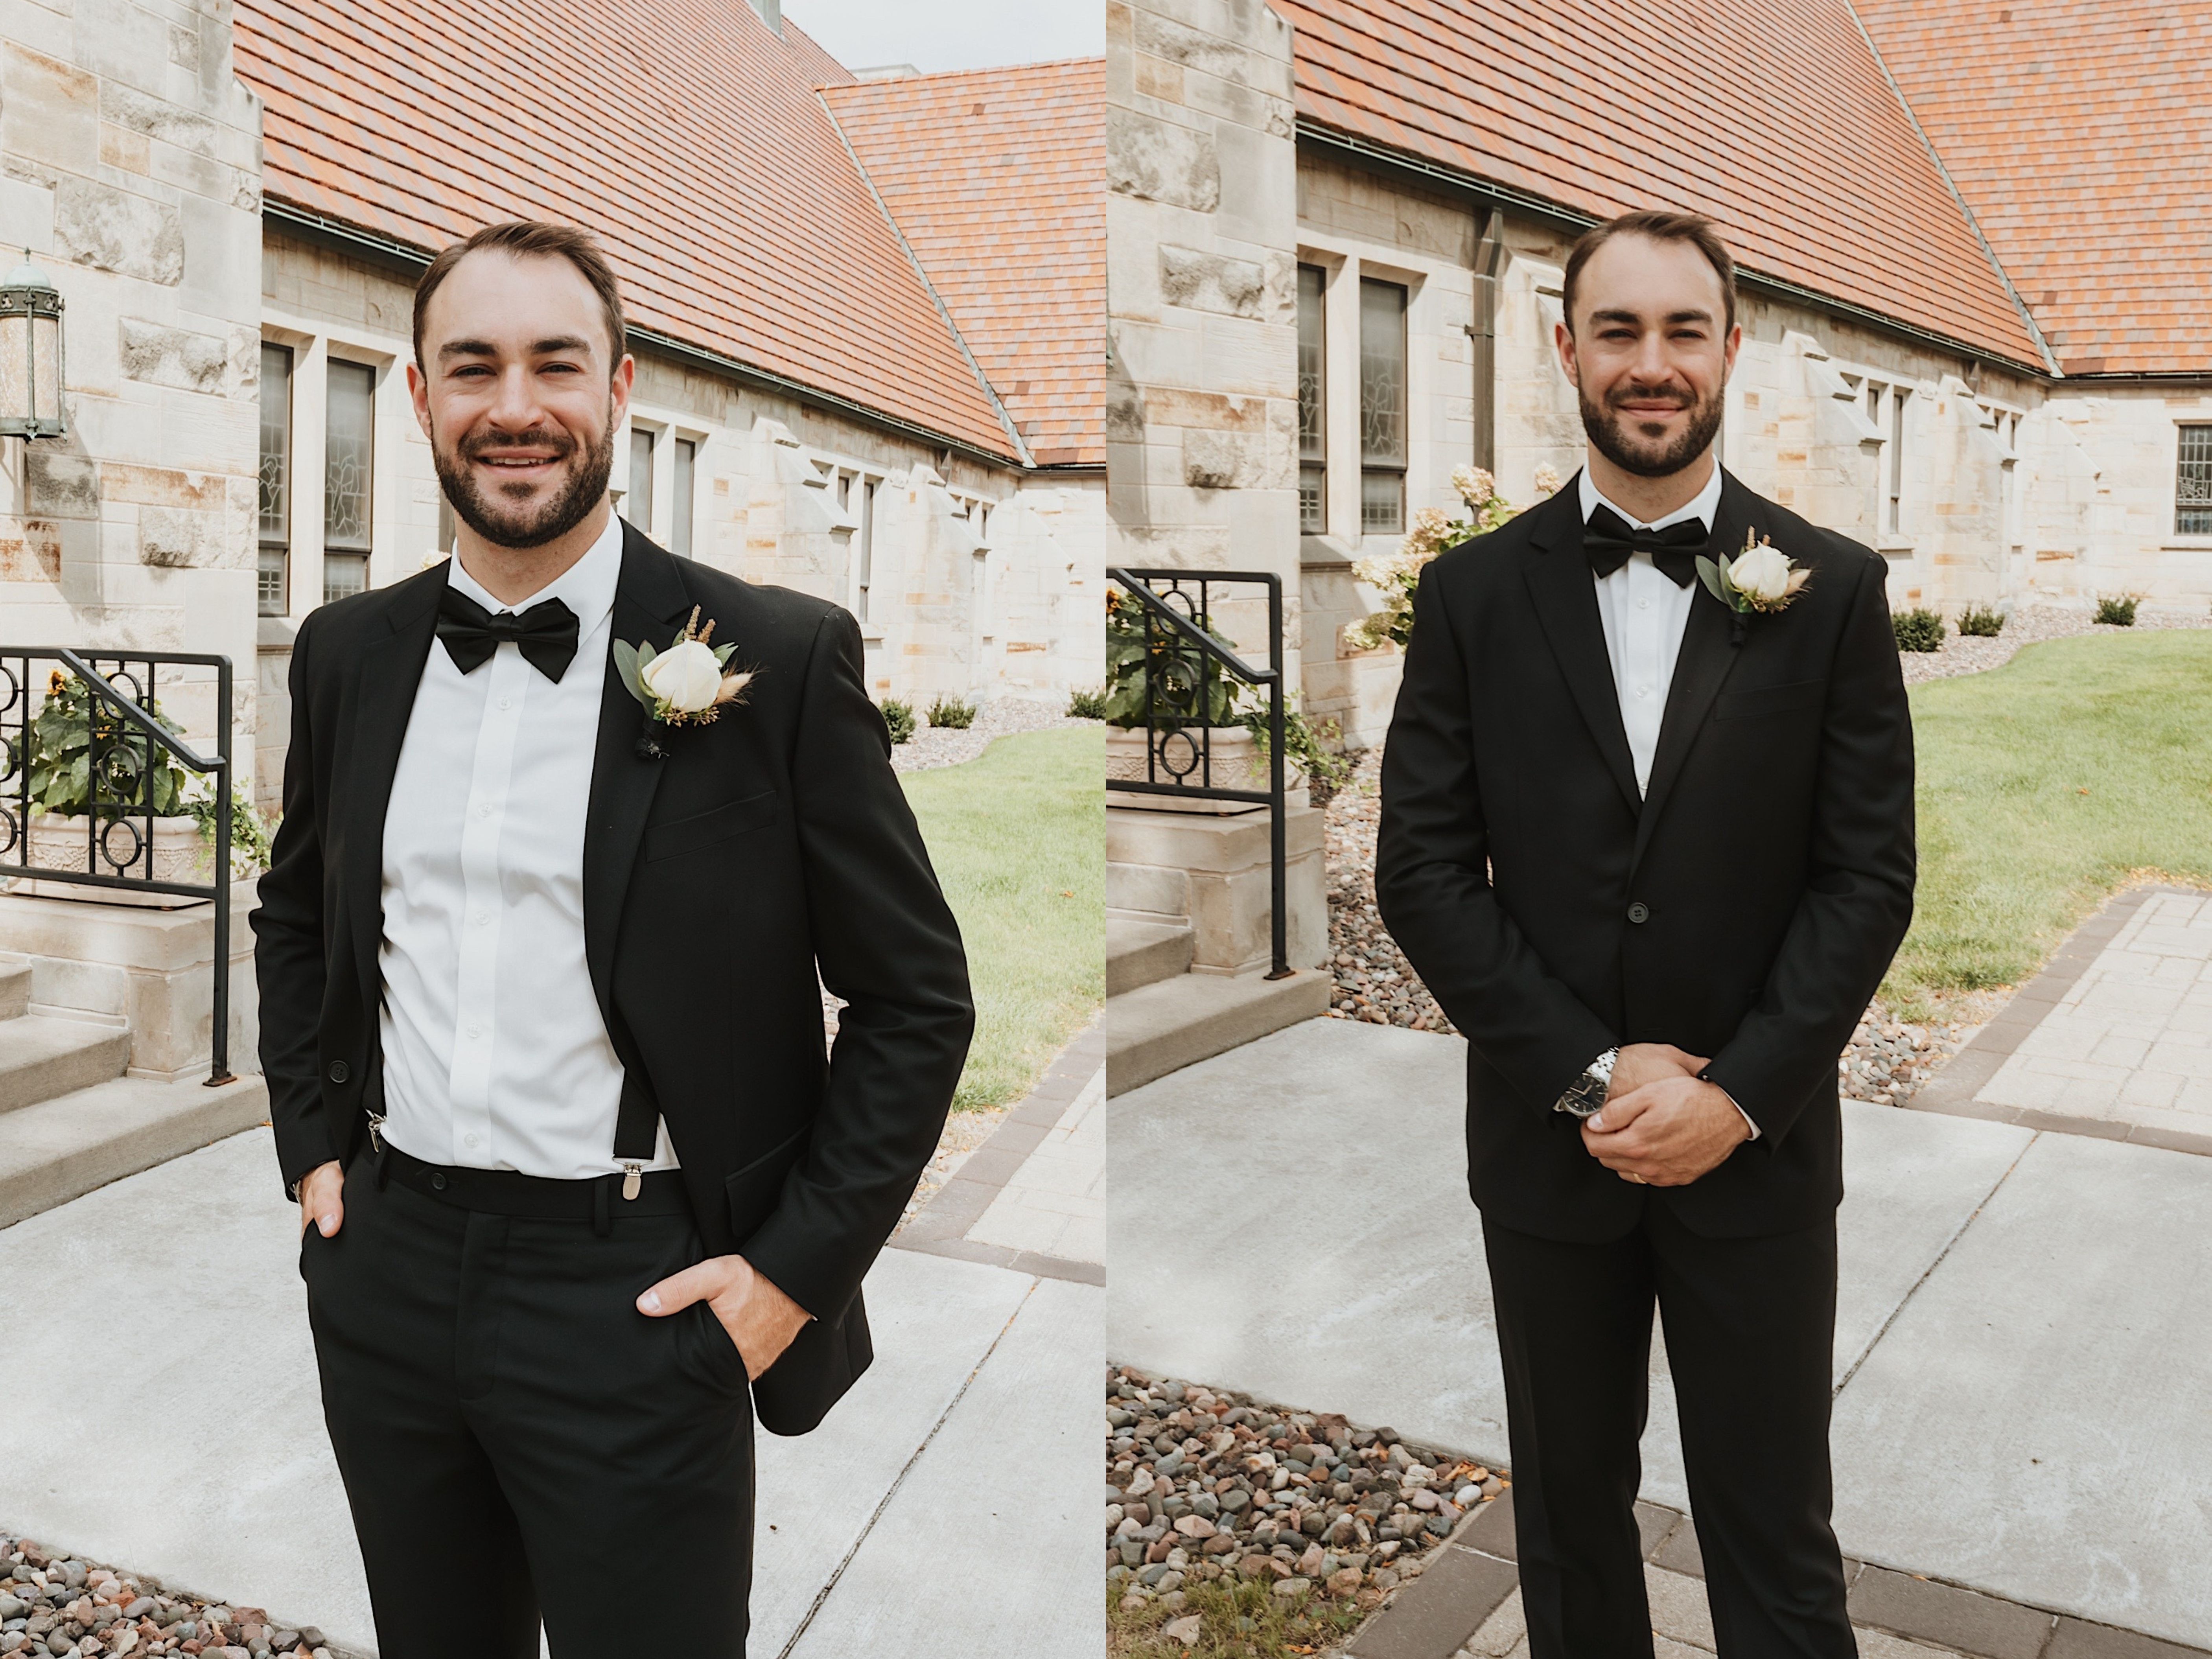 2 photos next to one another of a groom smiling at the camera